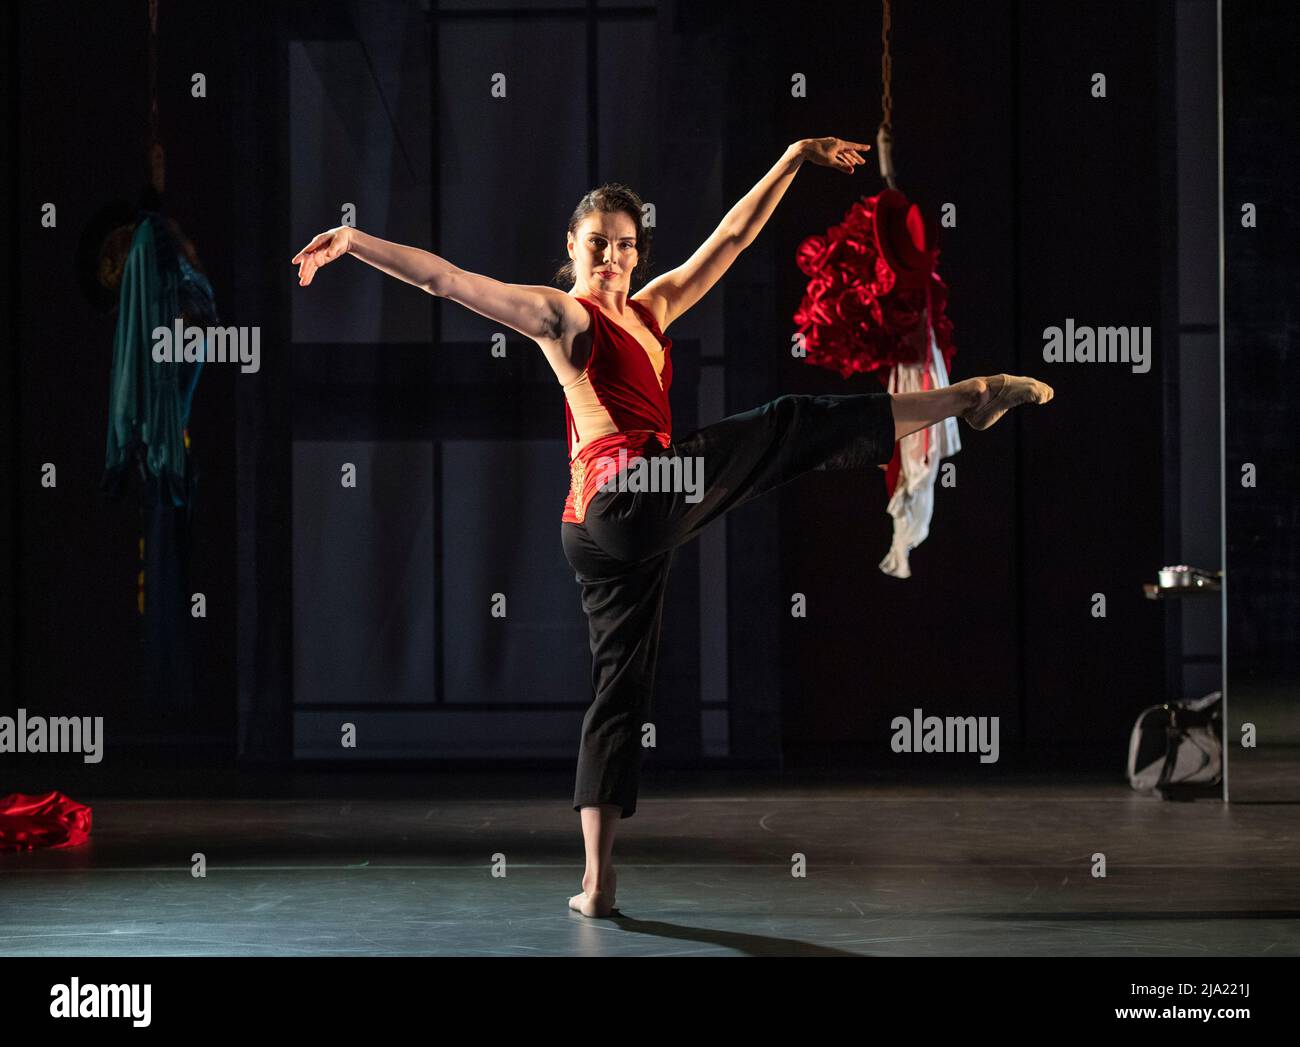 Queen Elizabeth Hall, Southbank Centre, London, UK. 26 May 2022. The London  premiere of Carmen, starring international ballet superstars Natalia  Osipova (The Royal Ballet) and Isaac Hernández runs from 27-28 May. Royal